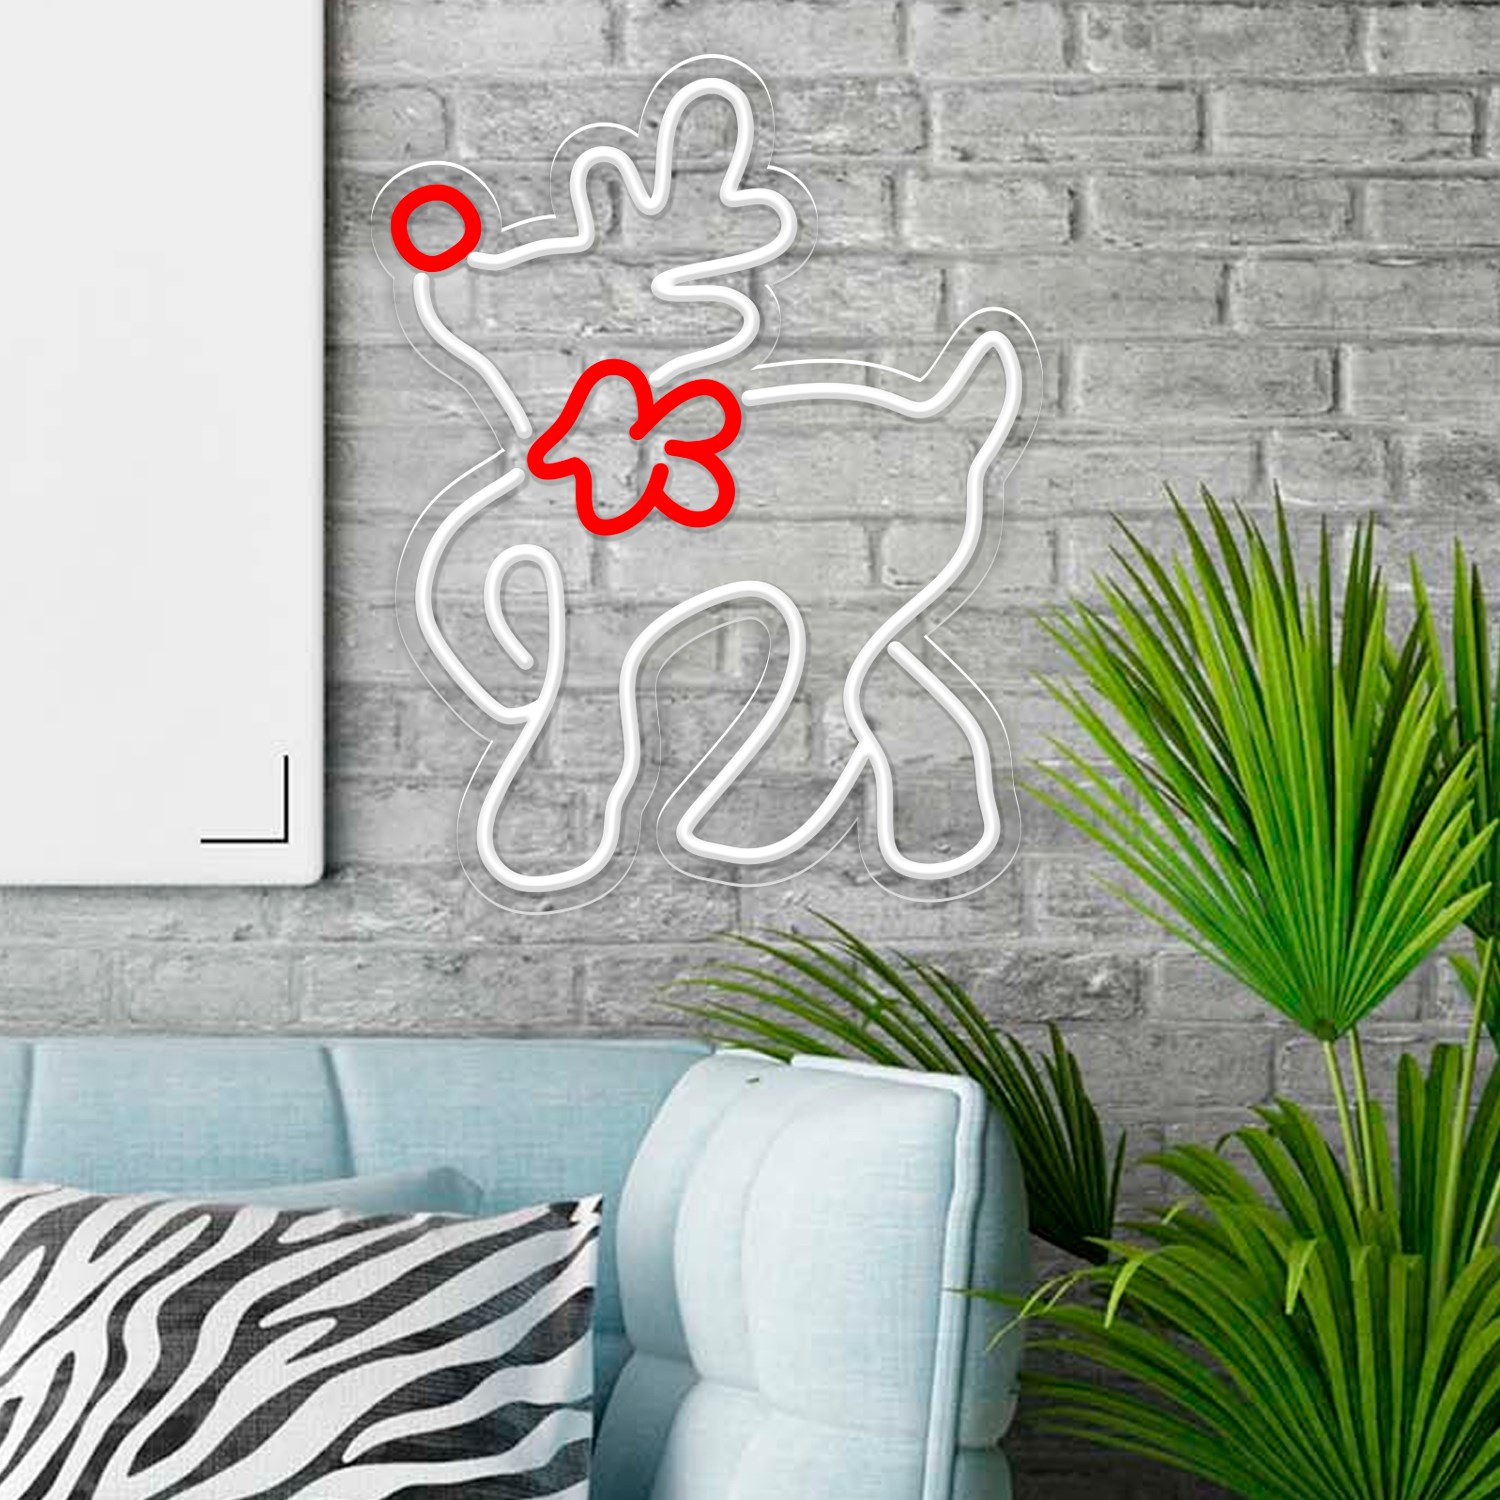 Picture of Christmas Deer Neon Sign